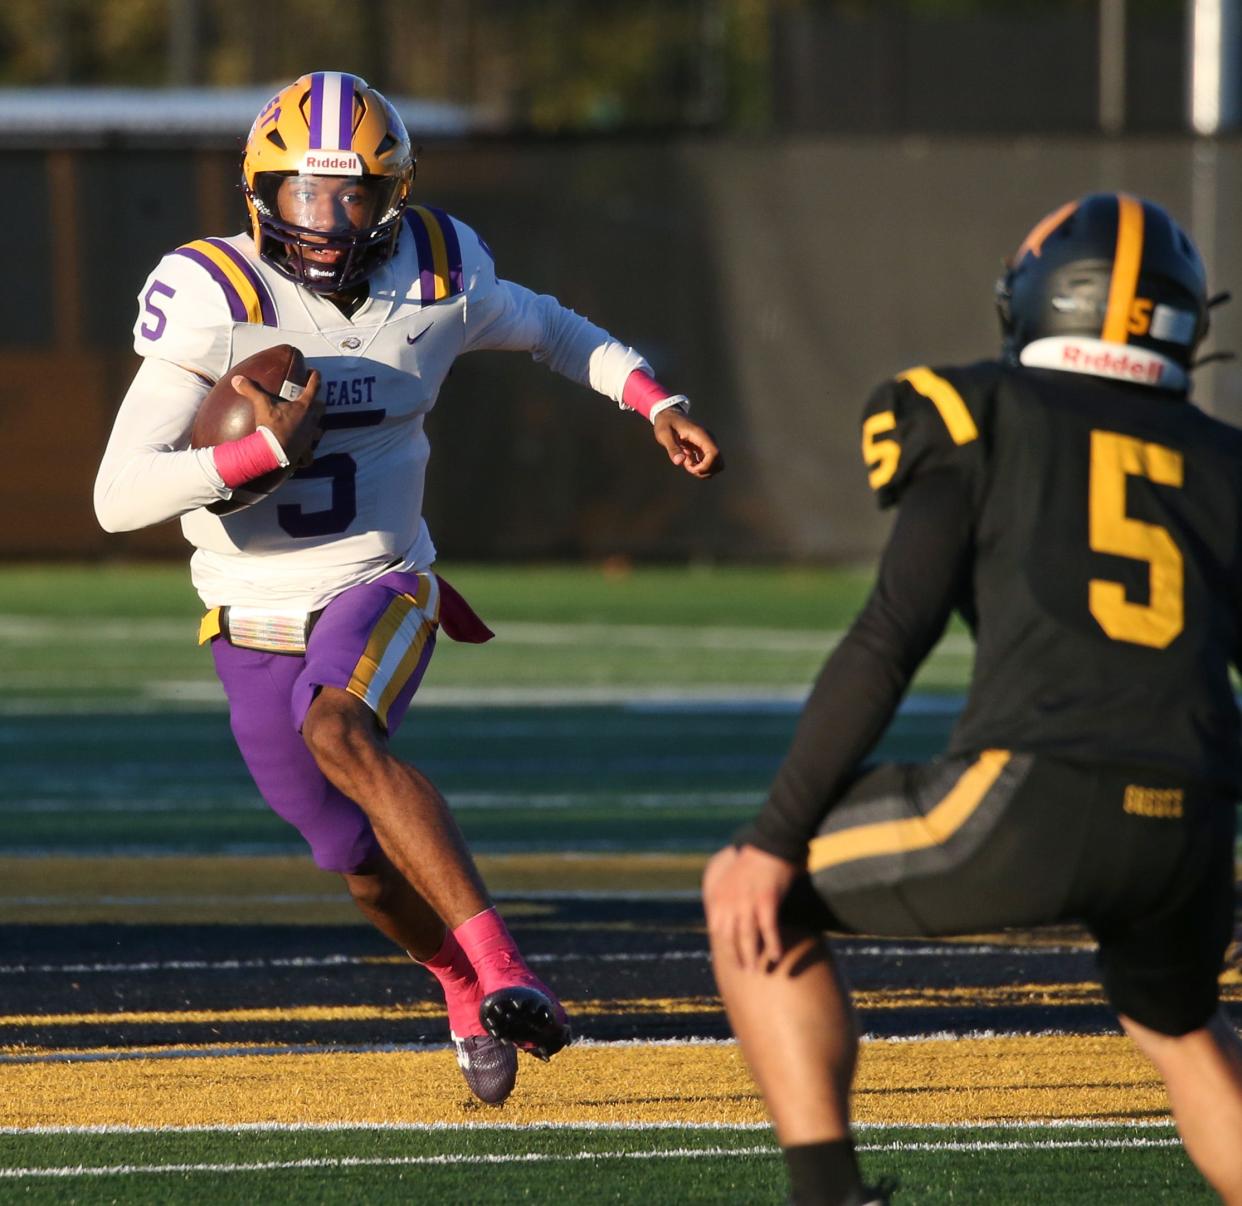 Football coaches in Section V named East/WOI's Zymier Jackson one of the area's best quarterbacks in 2022.